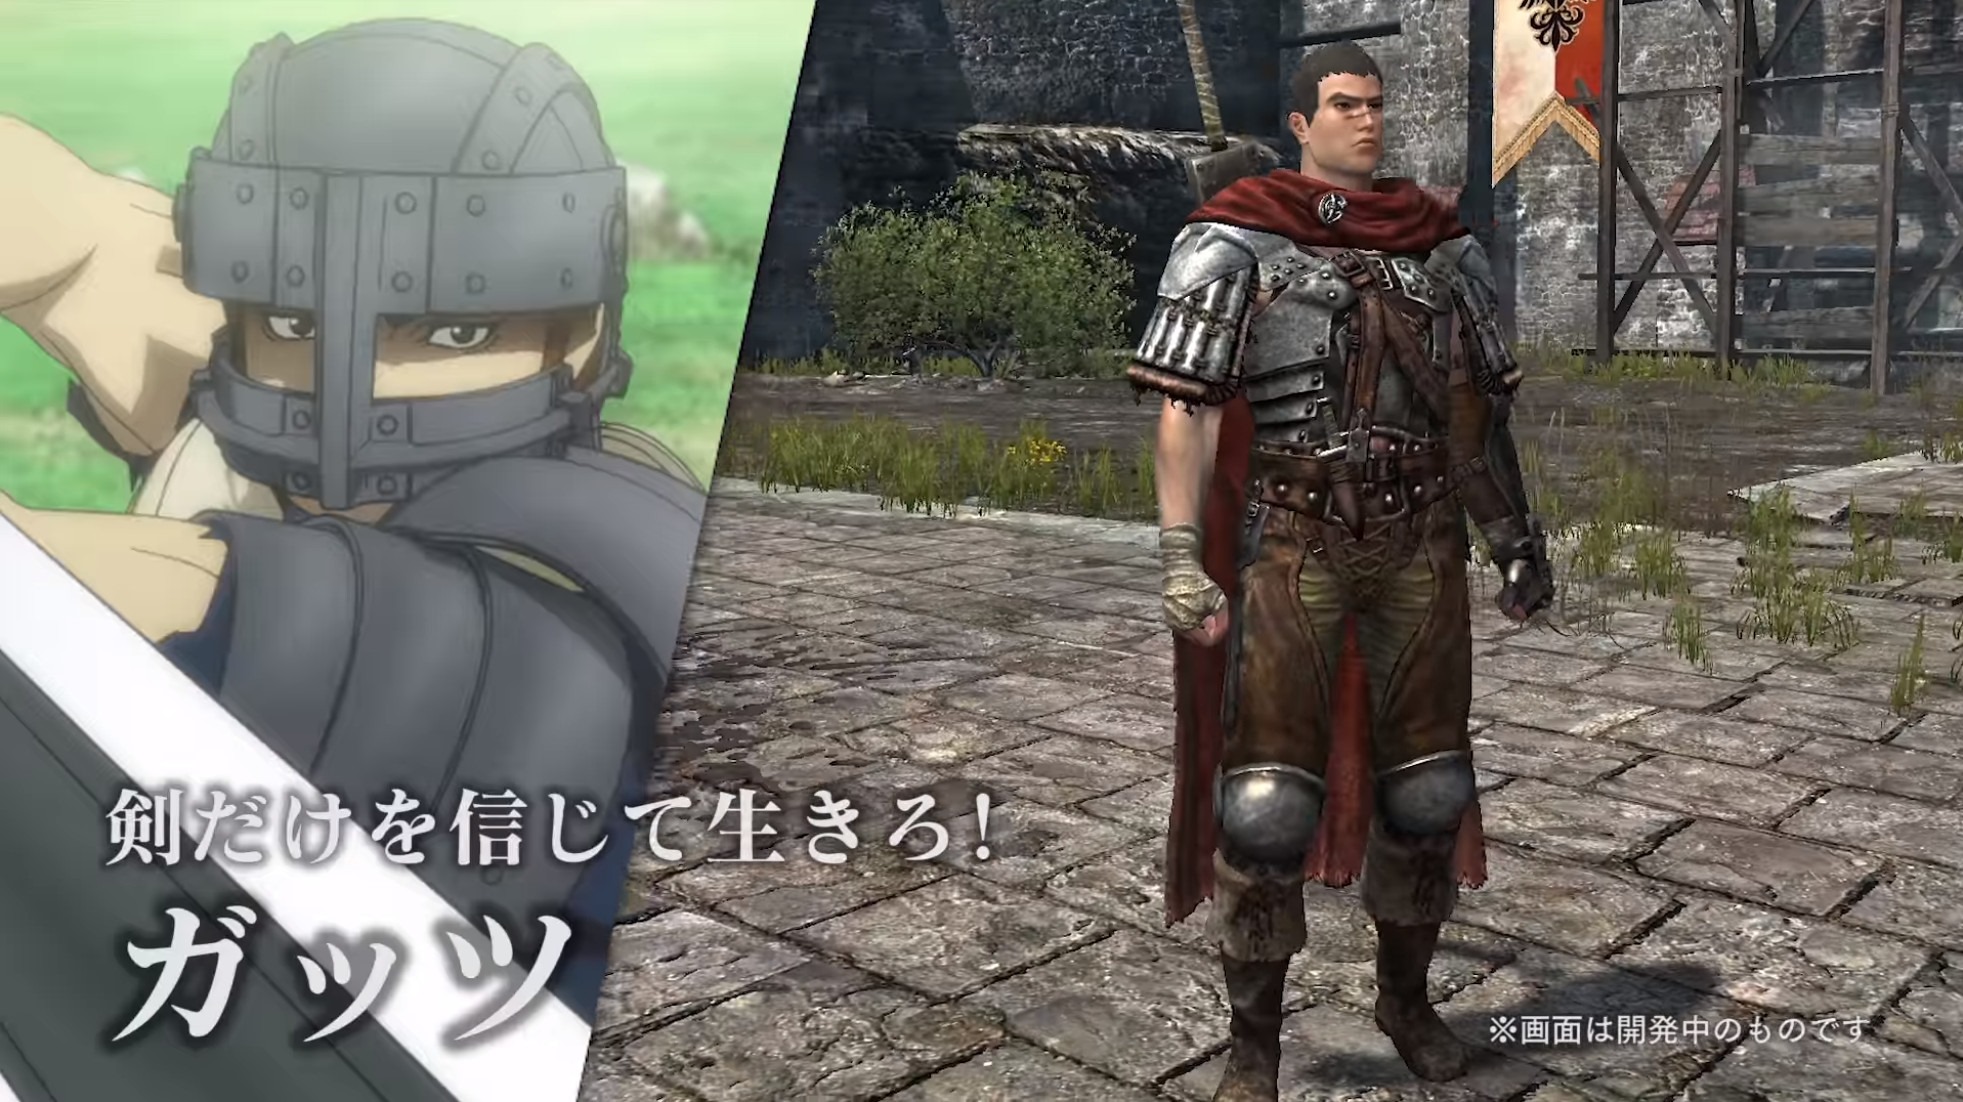 Dragon S Dogma Online Collaboration With Berserk Films Adds Costumes And Surprises Siliconera